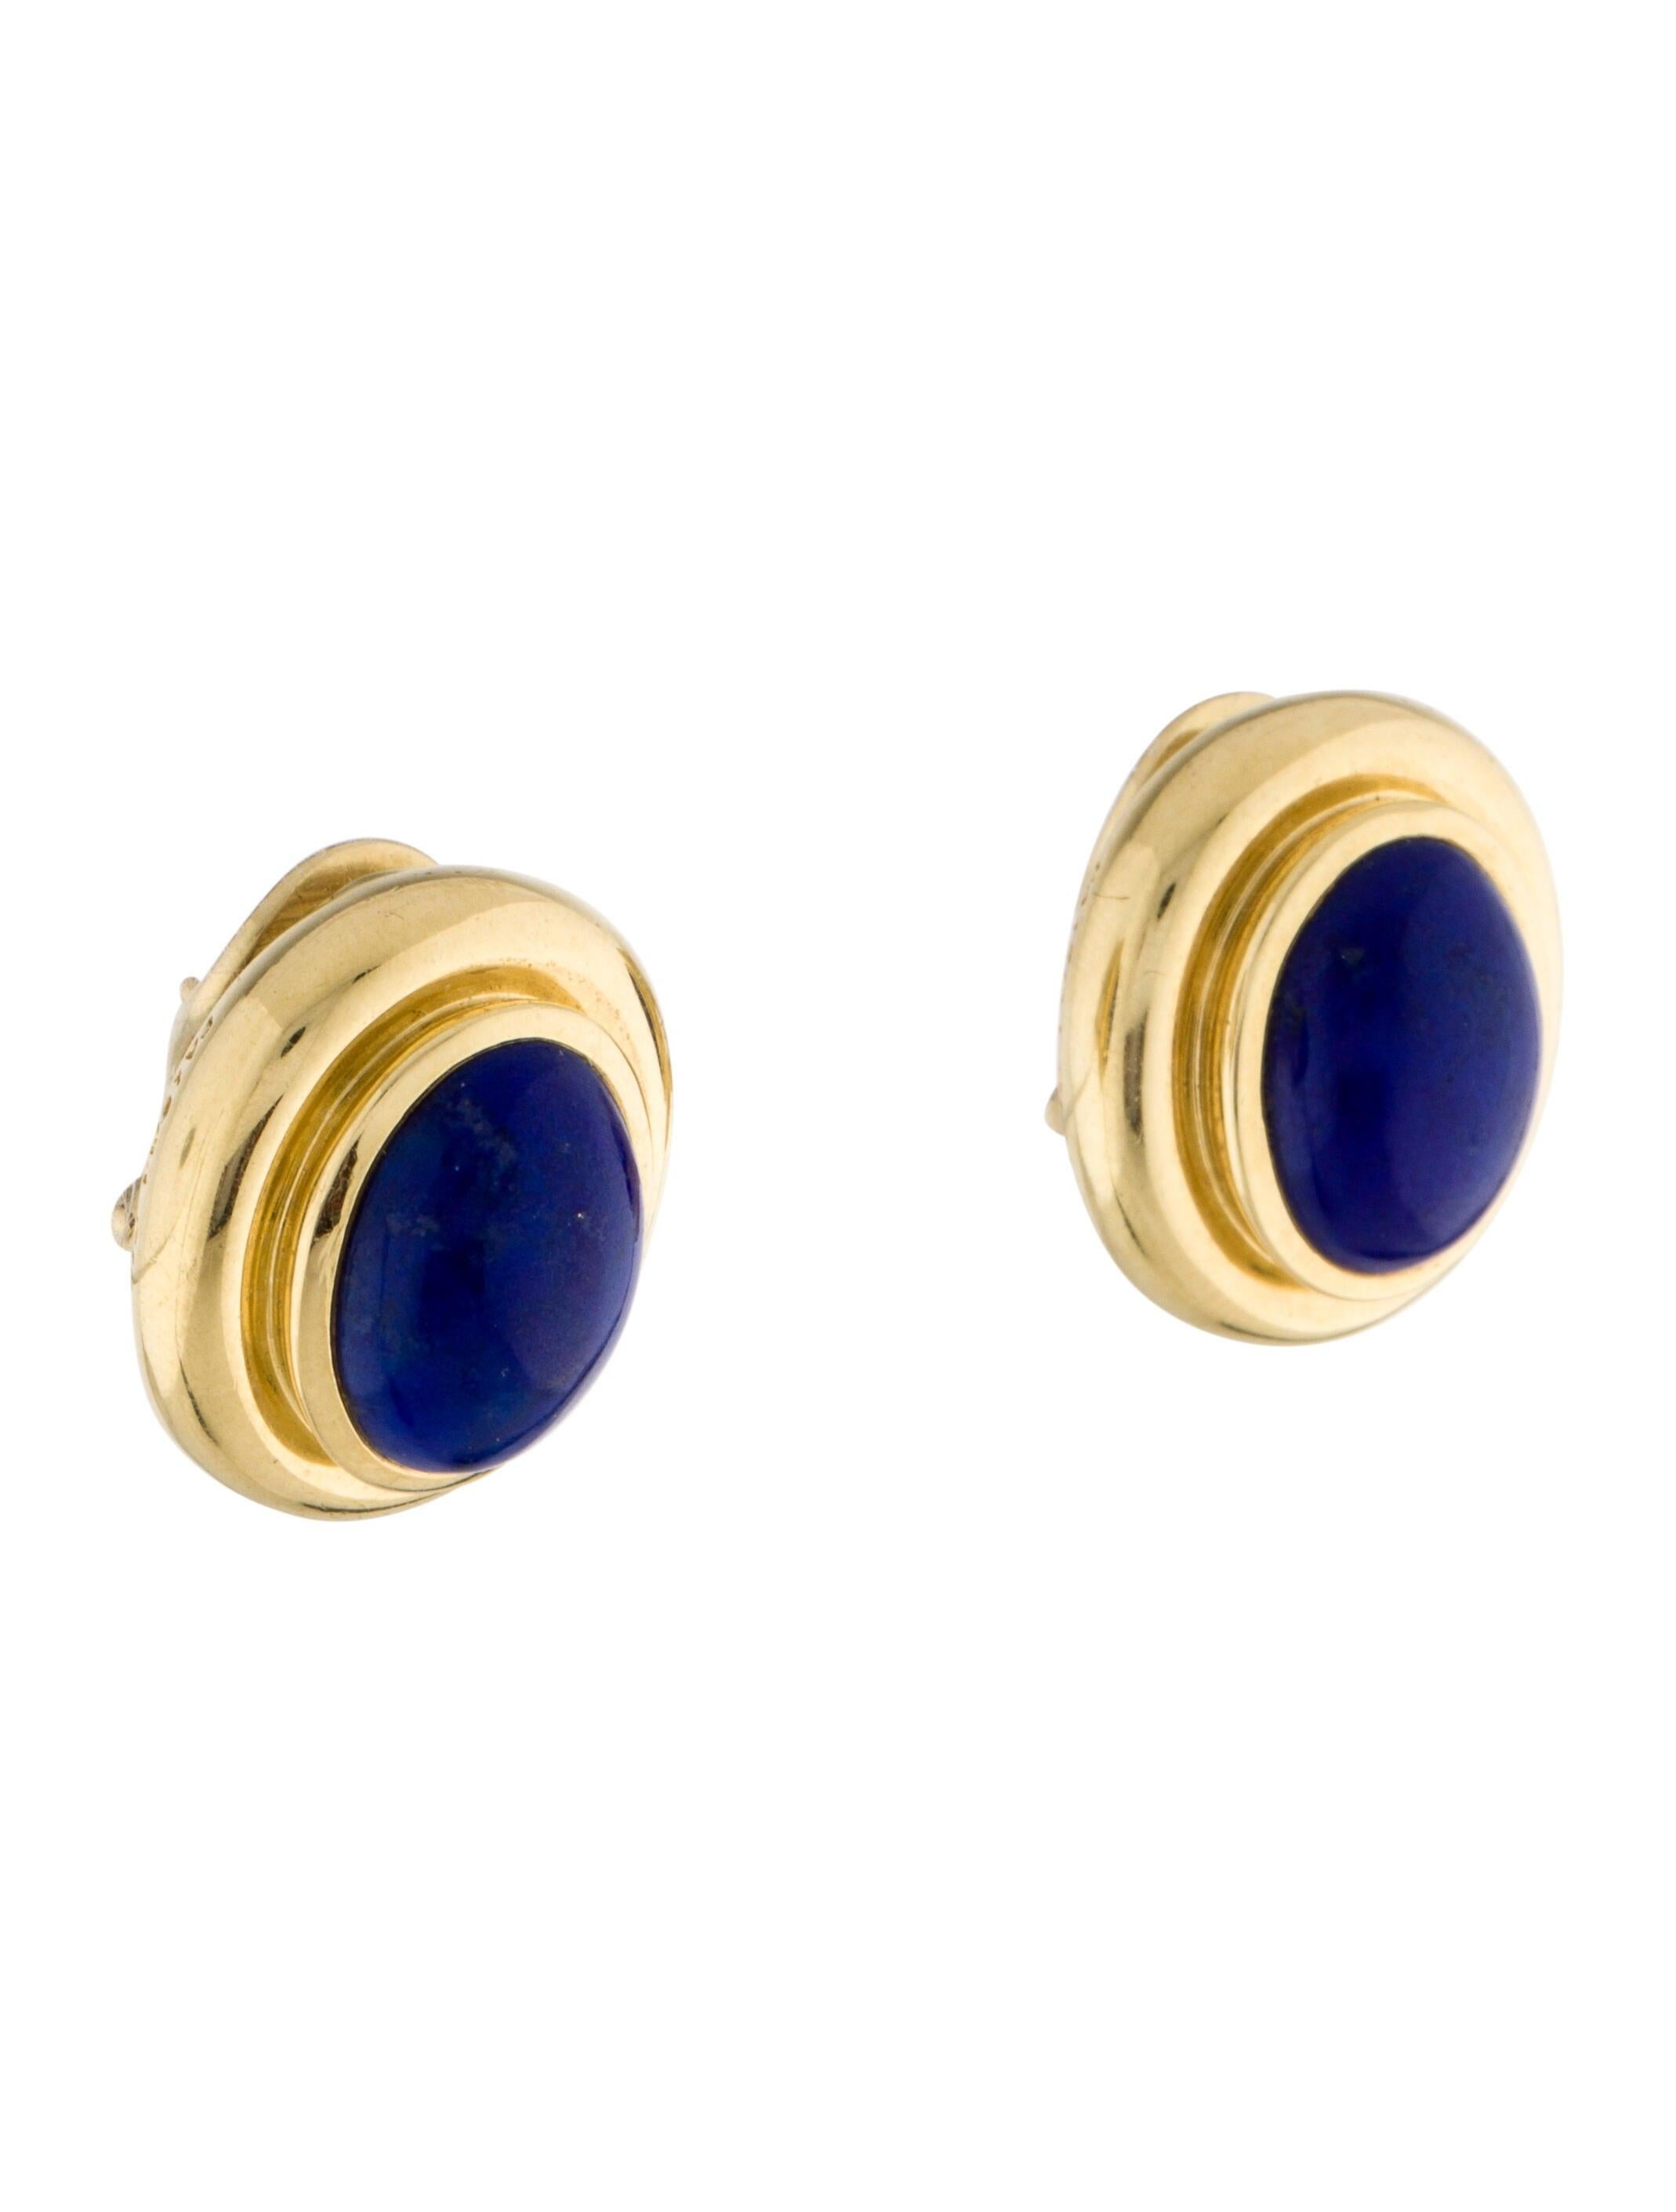 Tiffany & Co. Paloma Picasso 18k Yellow Gold & Lapis Earrings circa 1988 Vintage For Sale 2